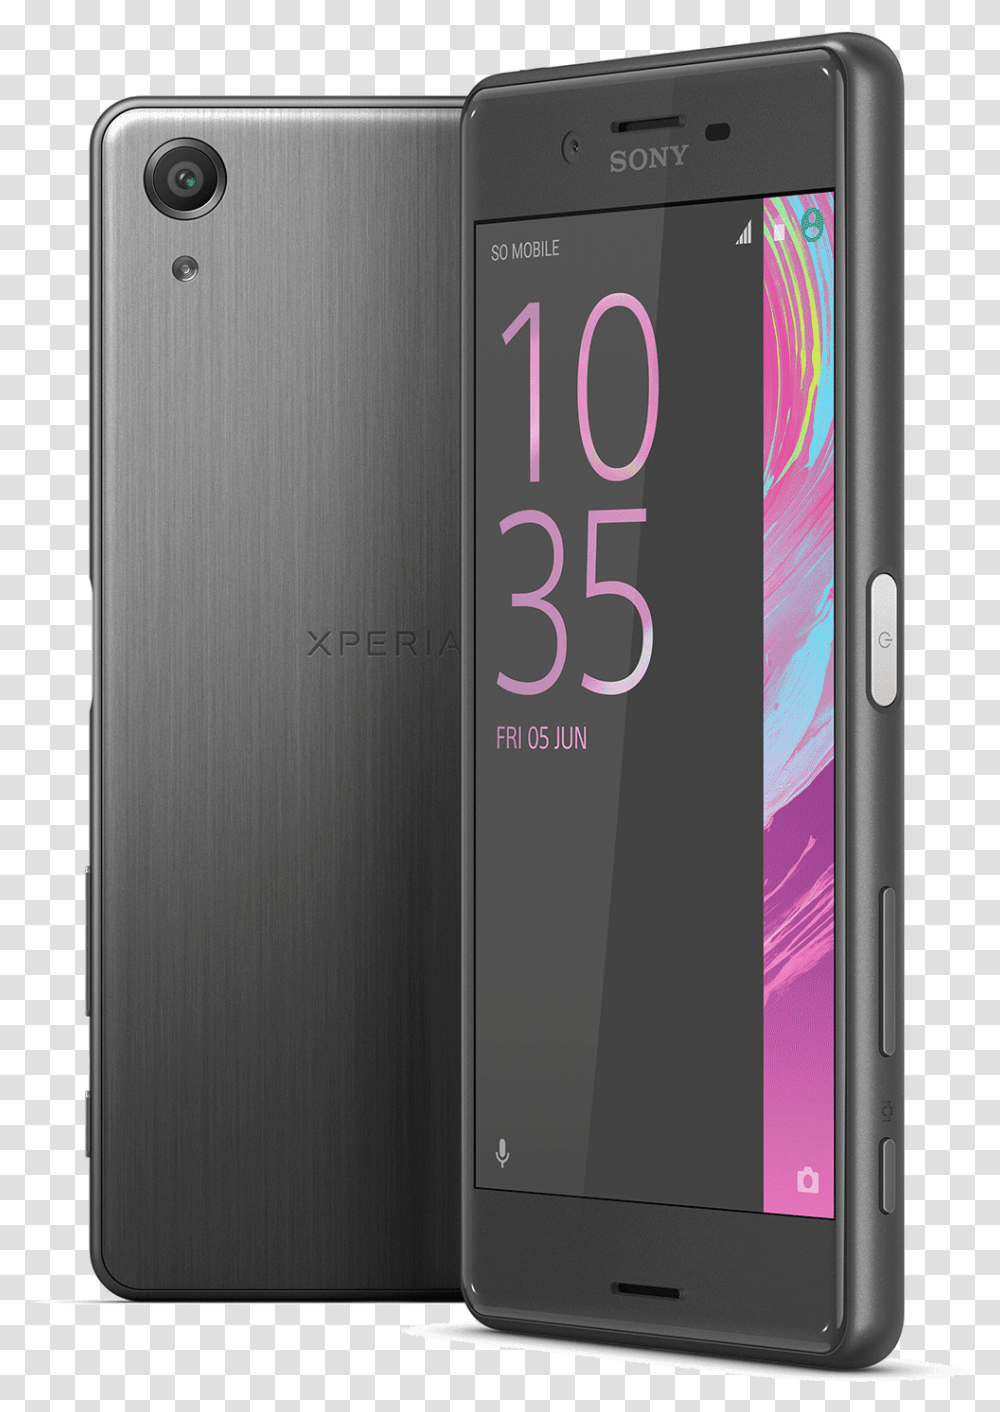 Sony Xperia X Performance Download Sony Xperia X, Mobile Phone, Electronics, Cell Phone, Iphone Transparent Png